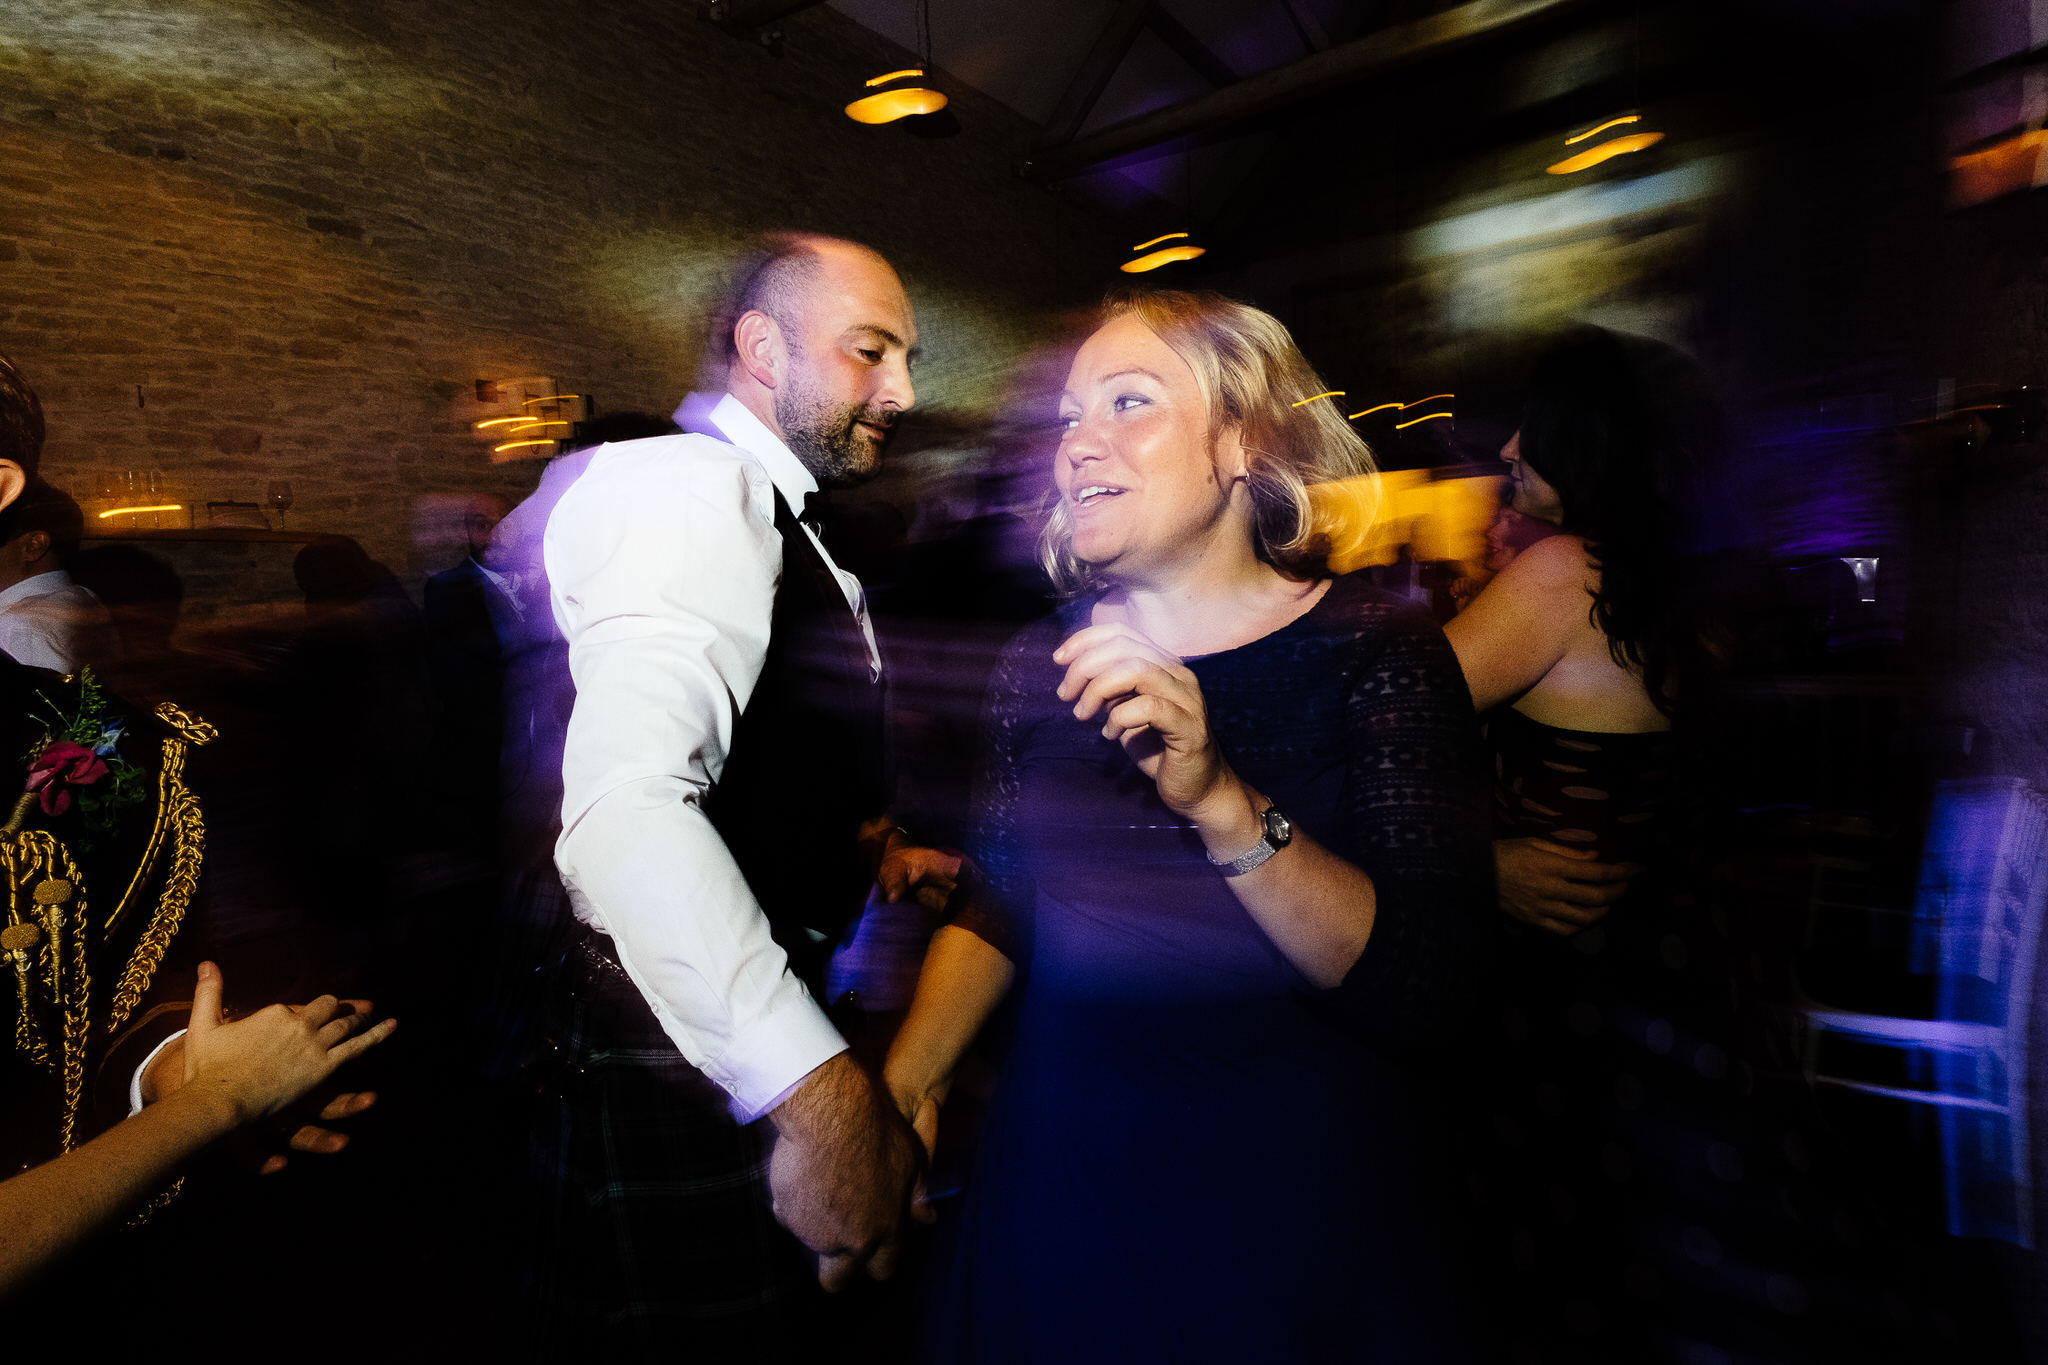 Guests partying at a wedding at Merriscourt Wedding Venue, Oxfordshire